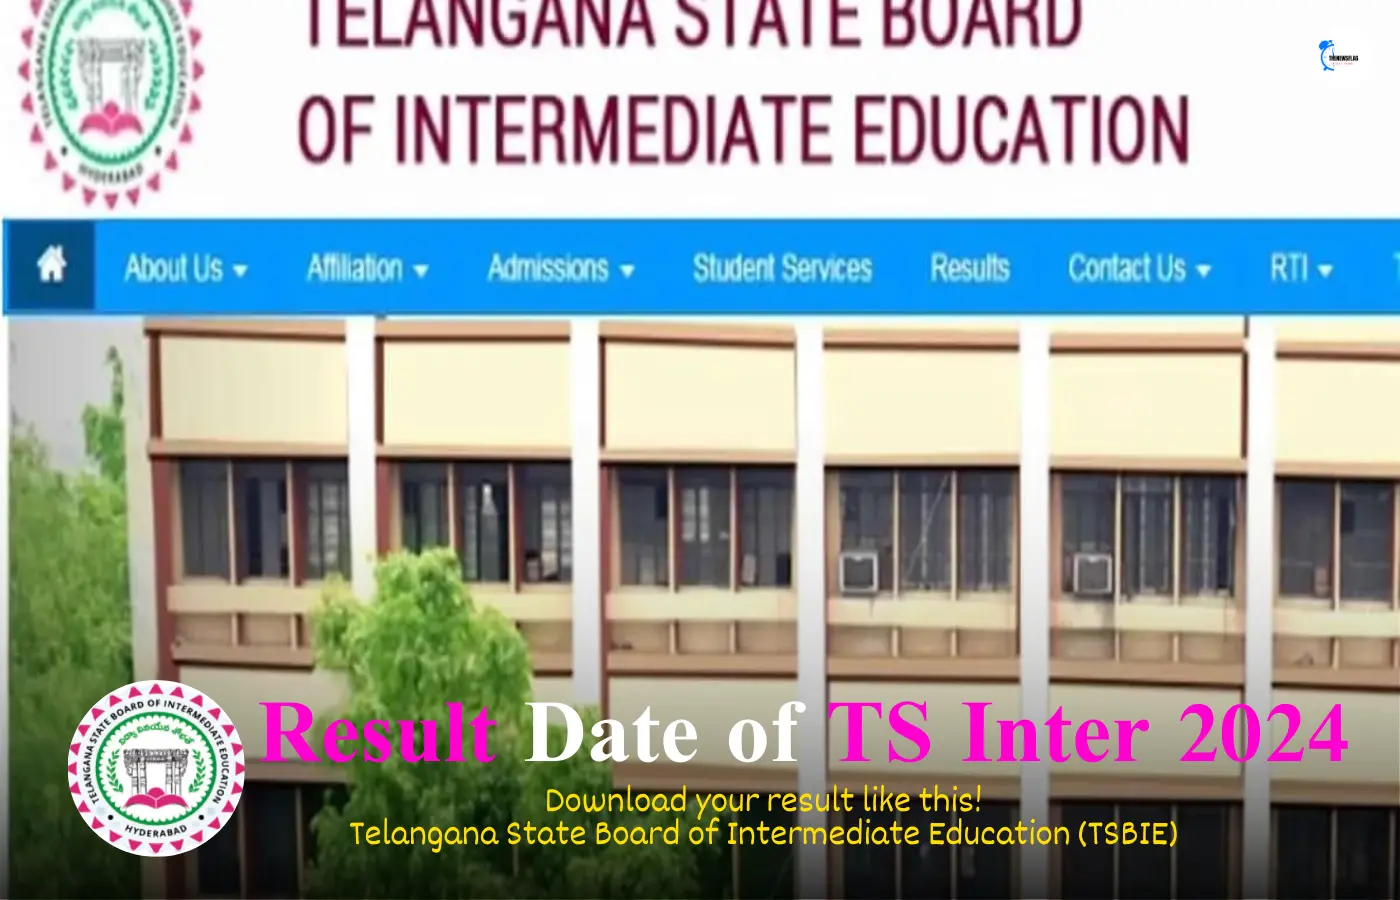 Result Date of TS Inter 2024